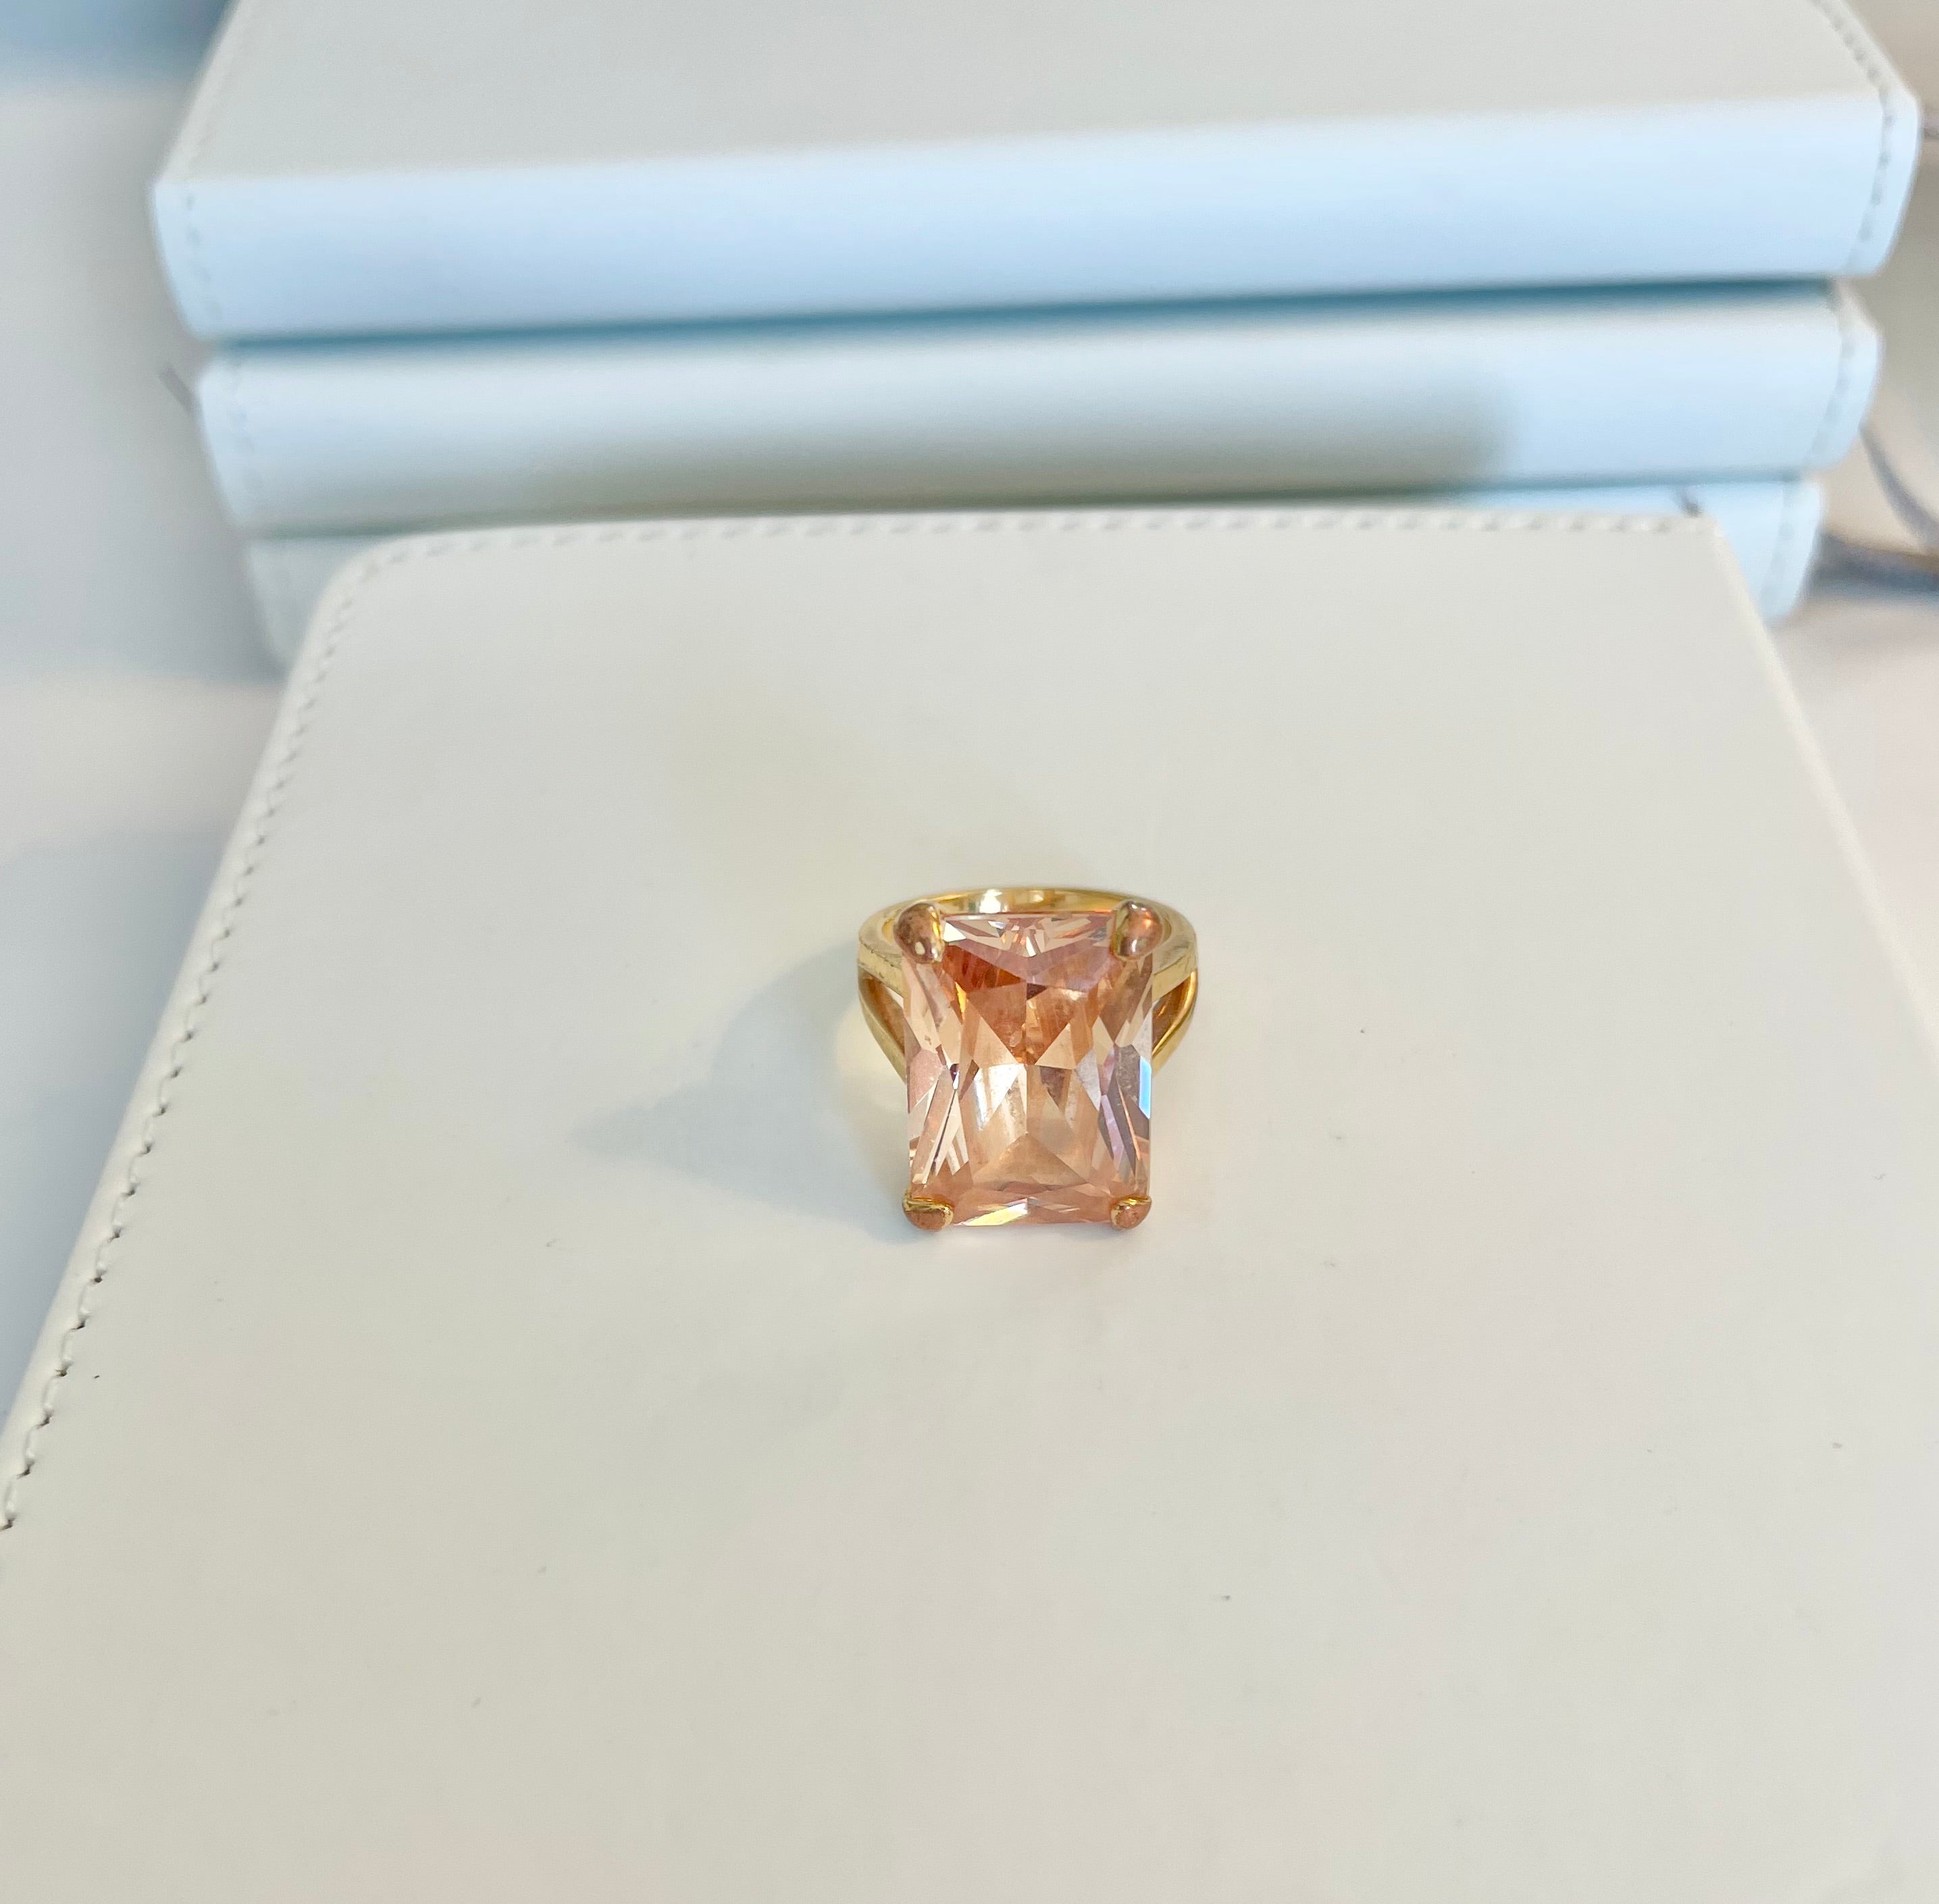 Vintage stunning, emerald cut faux orange citrine glass cocktail ring... so extraordinary